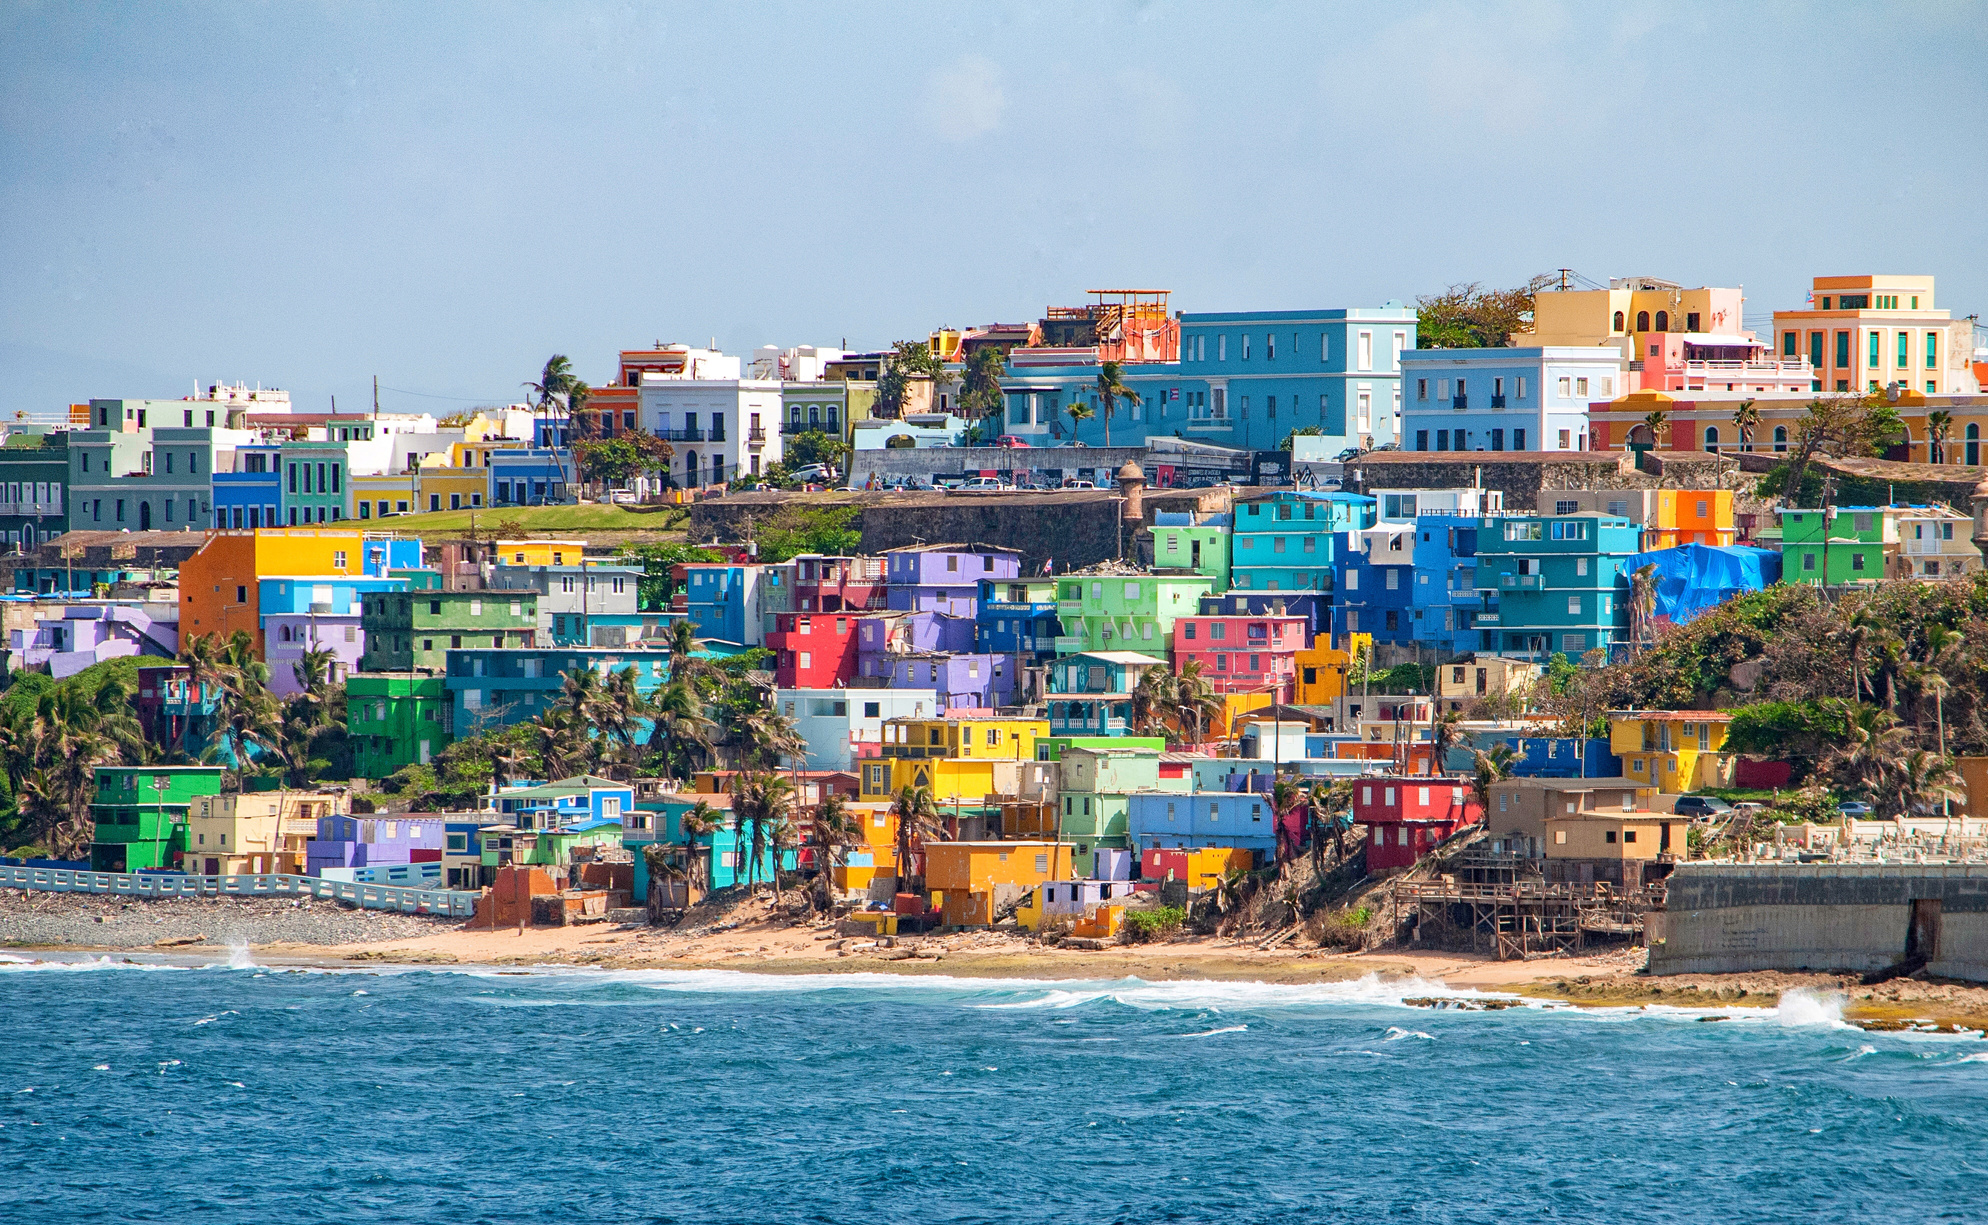 Bright colorful houses line the hills overlooking the beach in San Juan, Puerto Rico